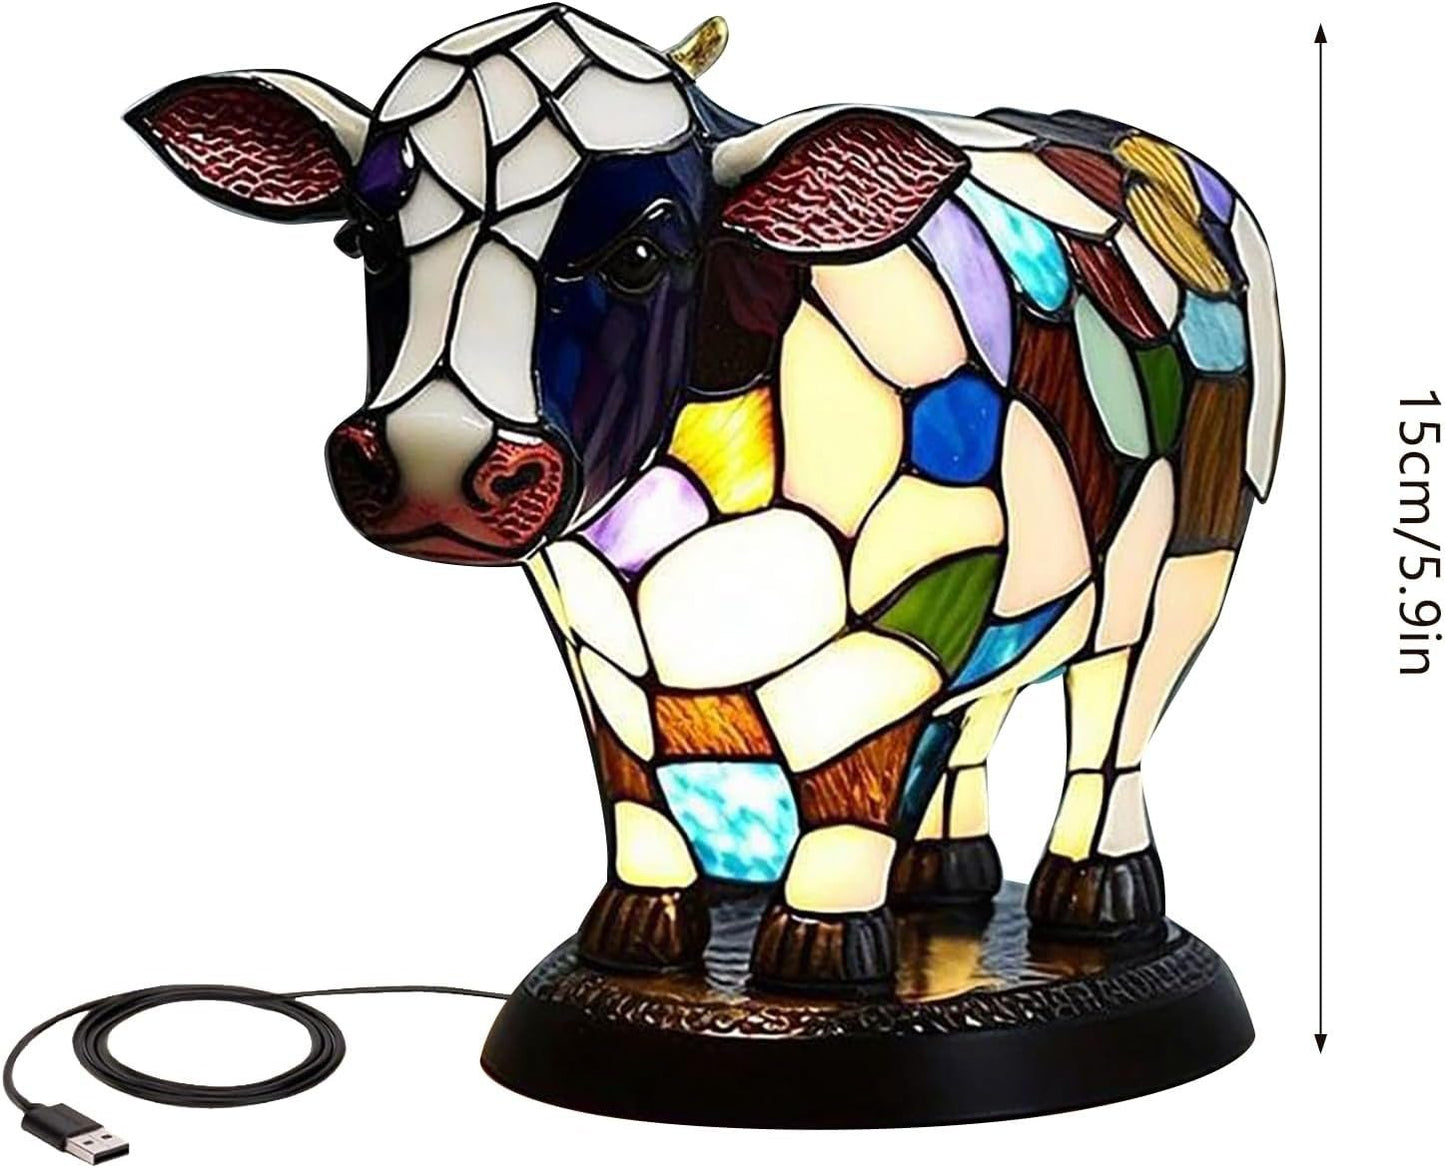 LAST DAY 49% OFF - ANIMAL COW TABLE LAMP mysite